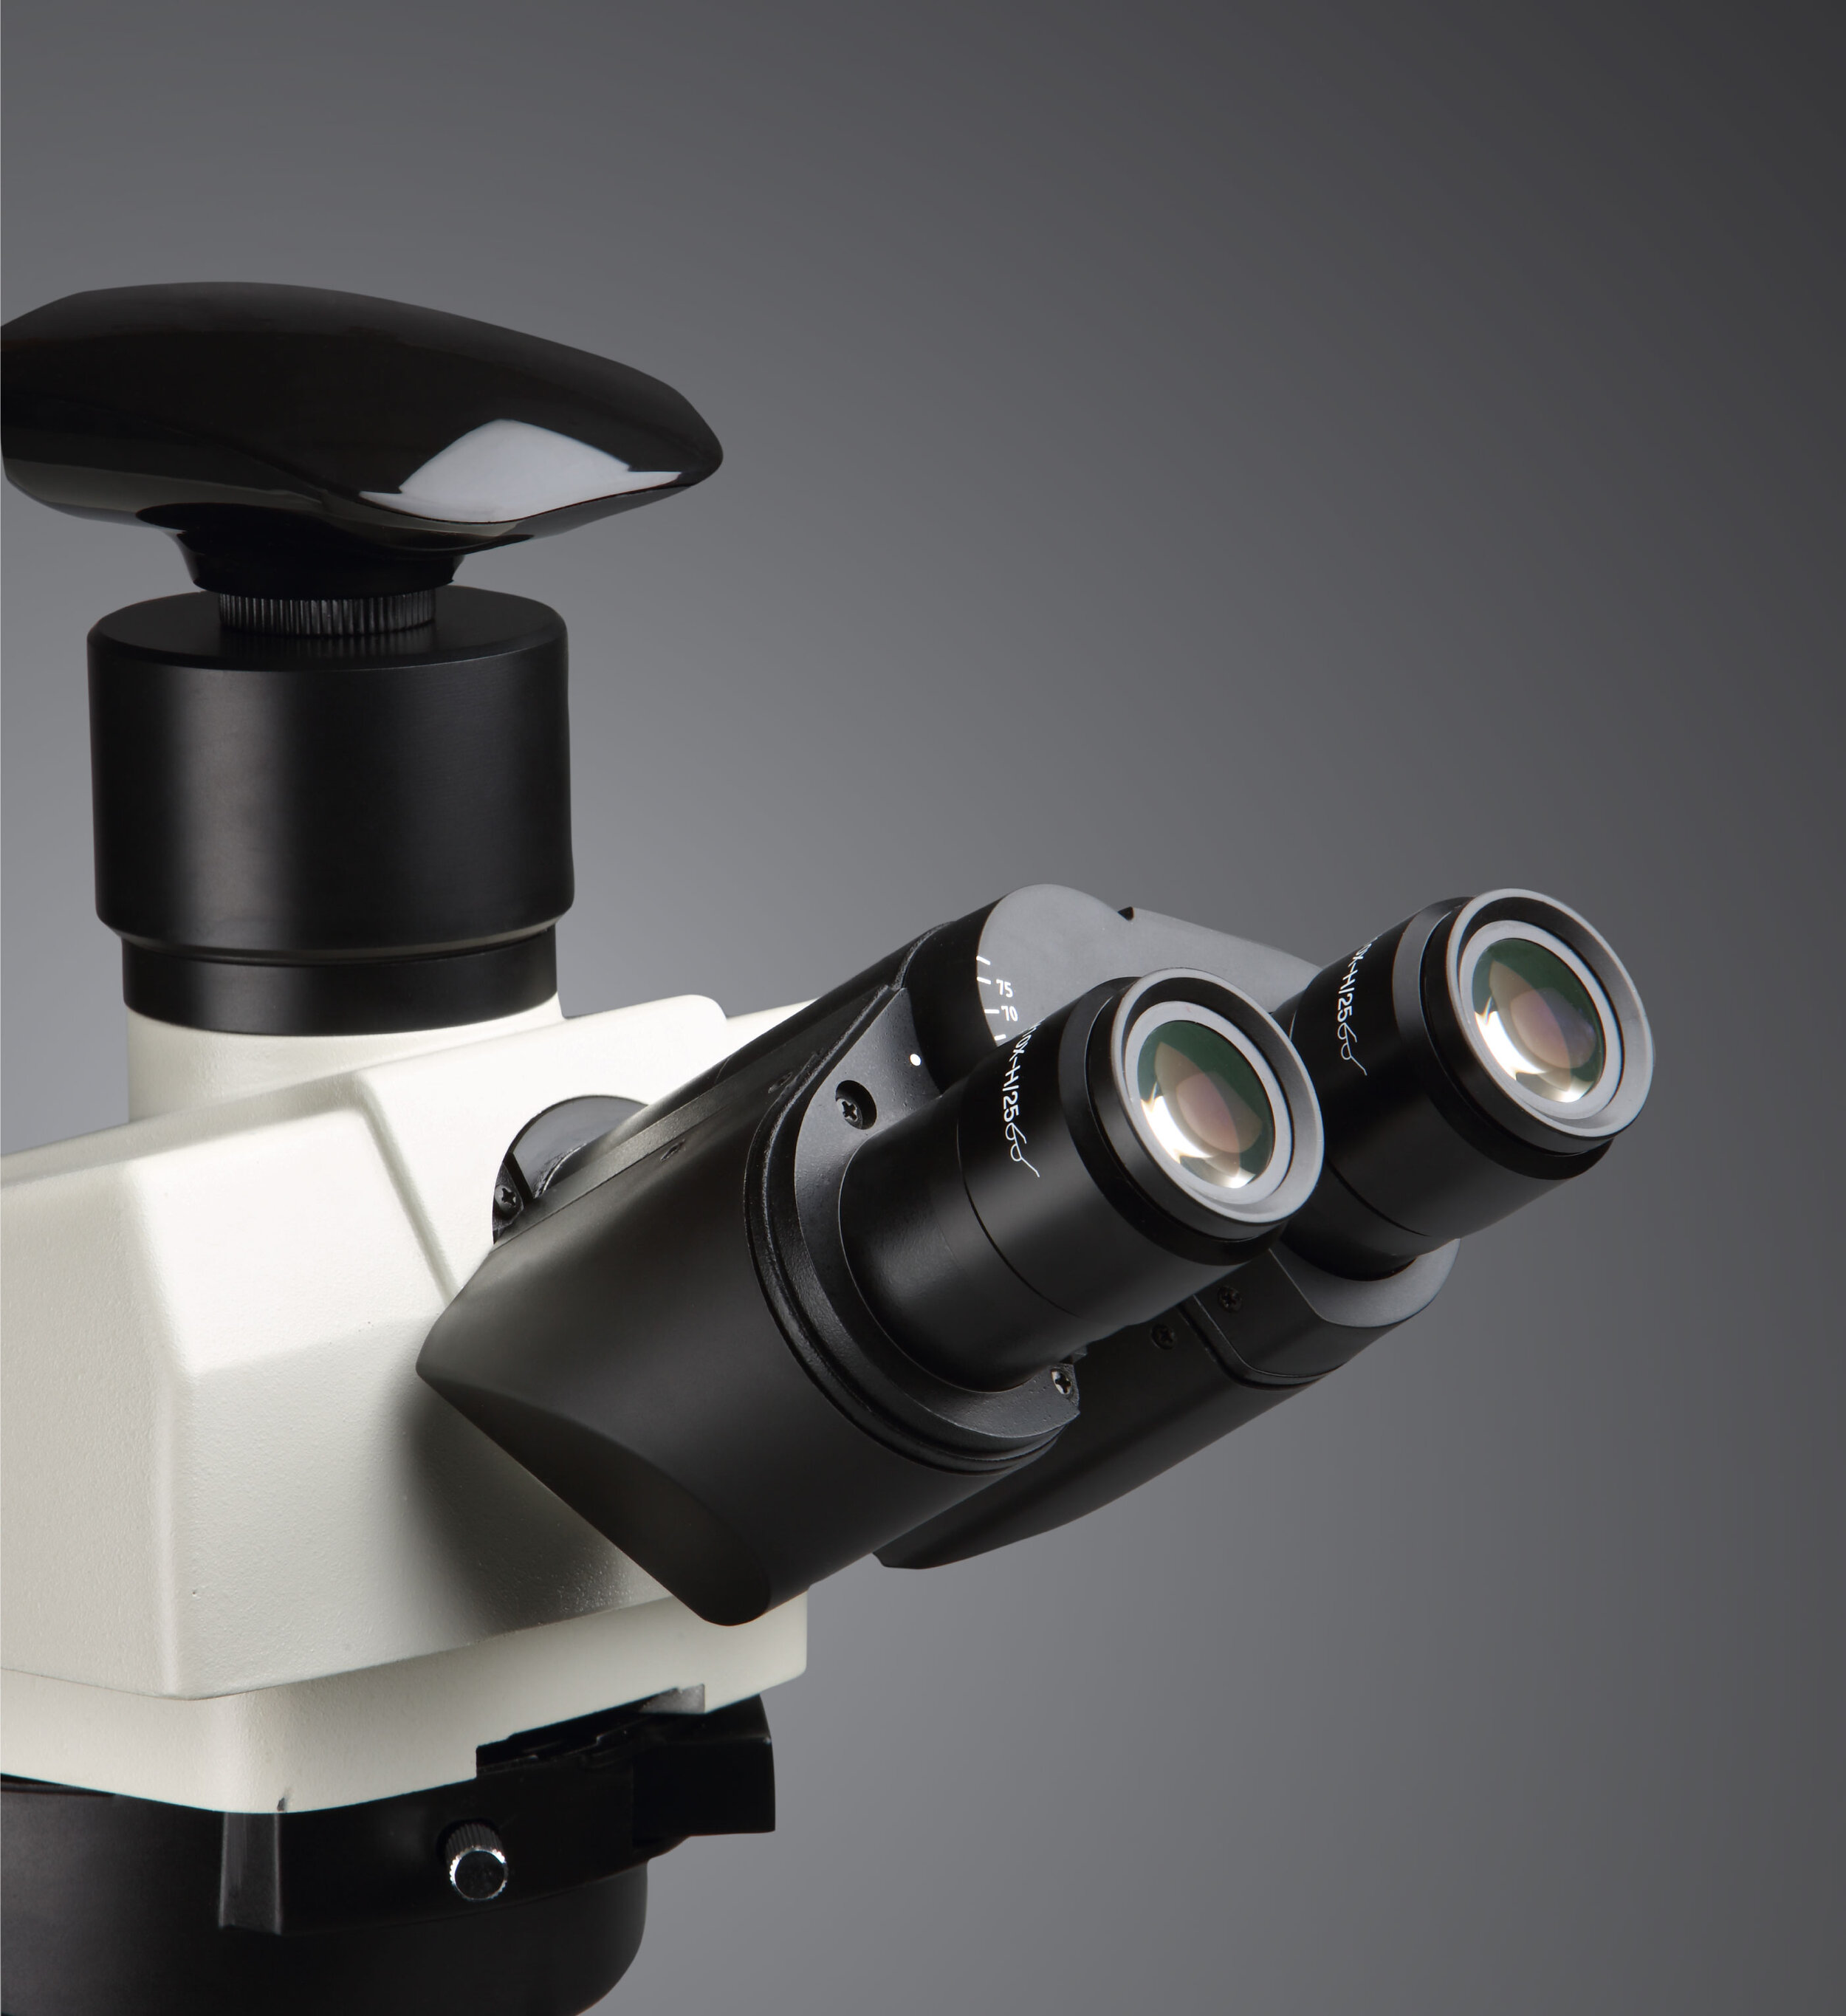 Digital Microscopes - Our range of digital microscopes are economic, reliable and long lasting. The range we offer is a breakthrough precision measuring and gauging equipment in the global digital microscope market.